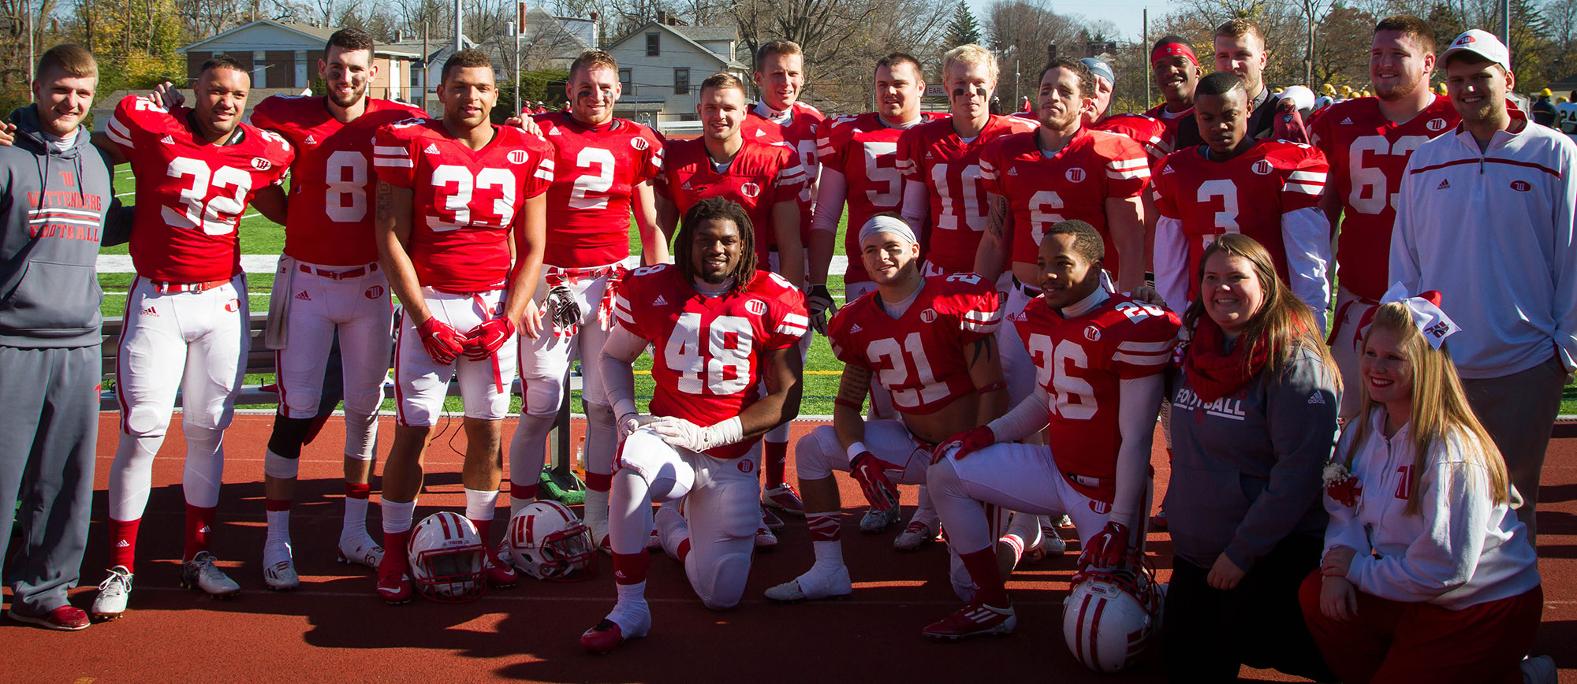 Wittenberg's seniors pose before their final collegiate game. Photo by Blake Nelson '17